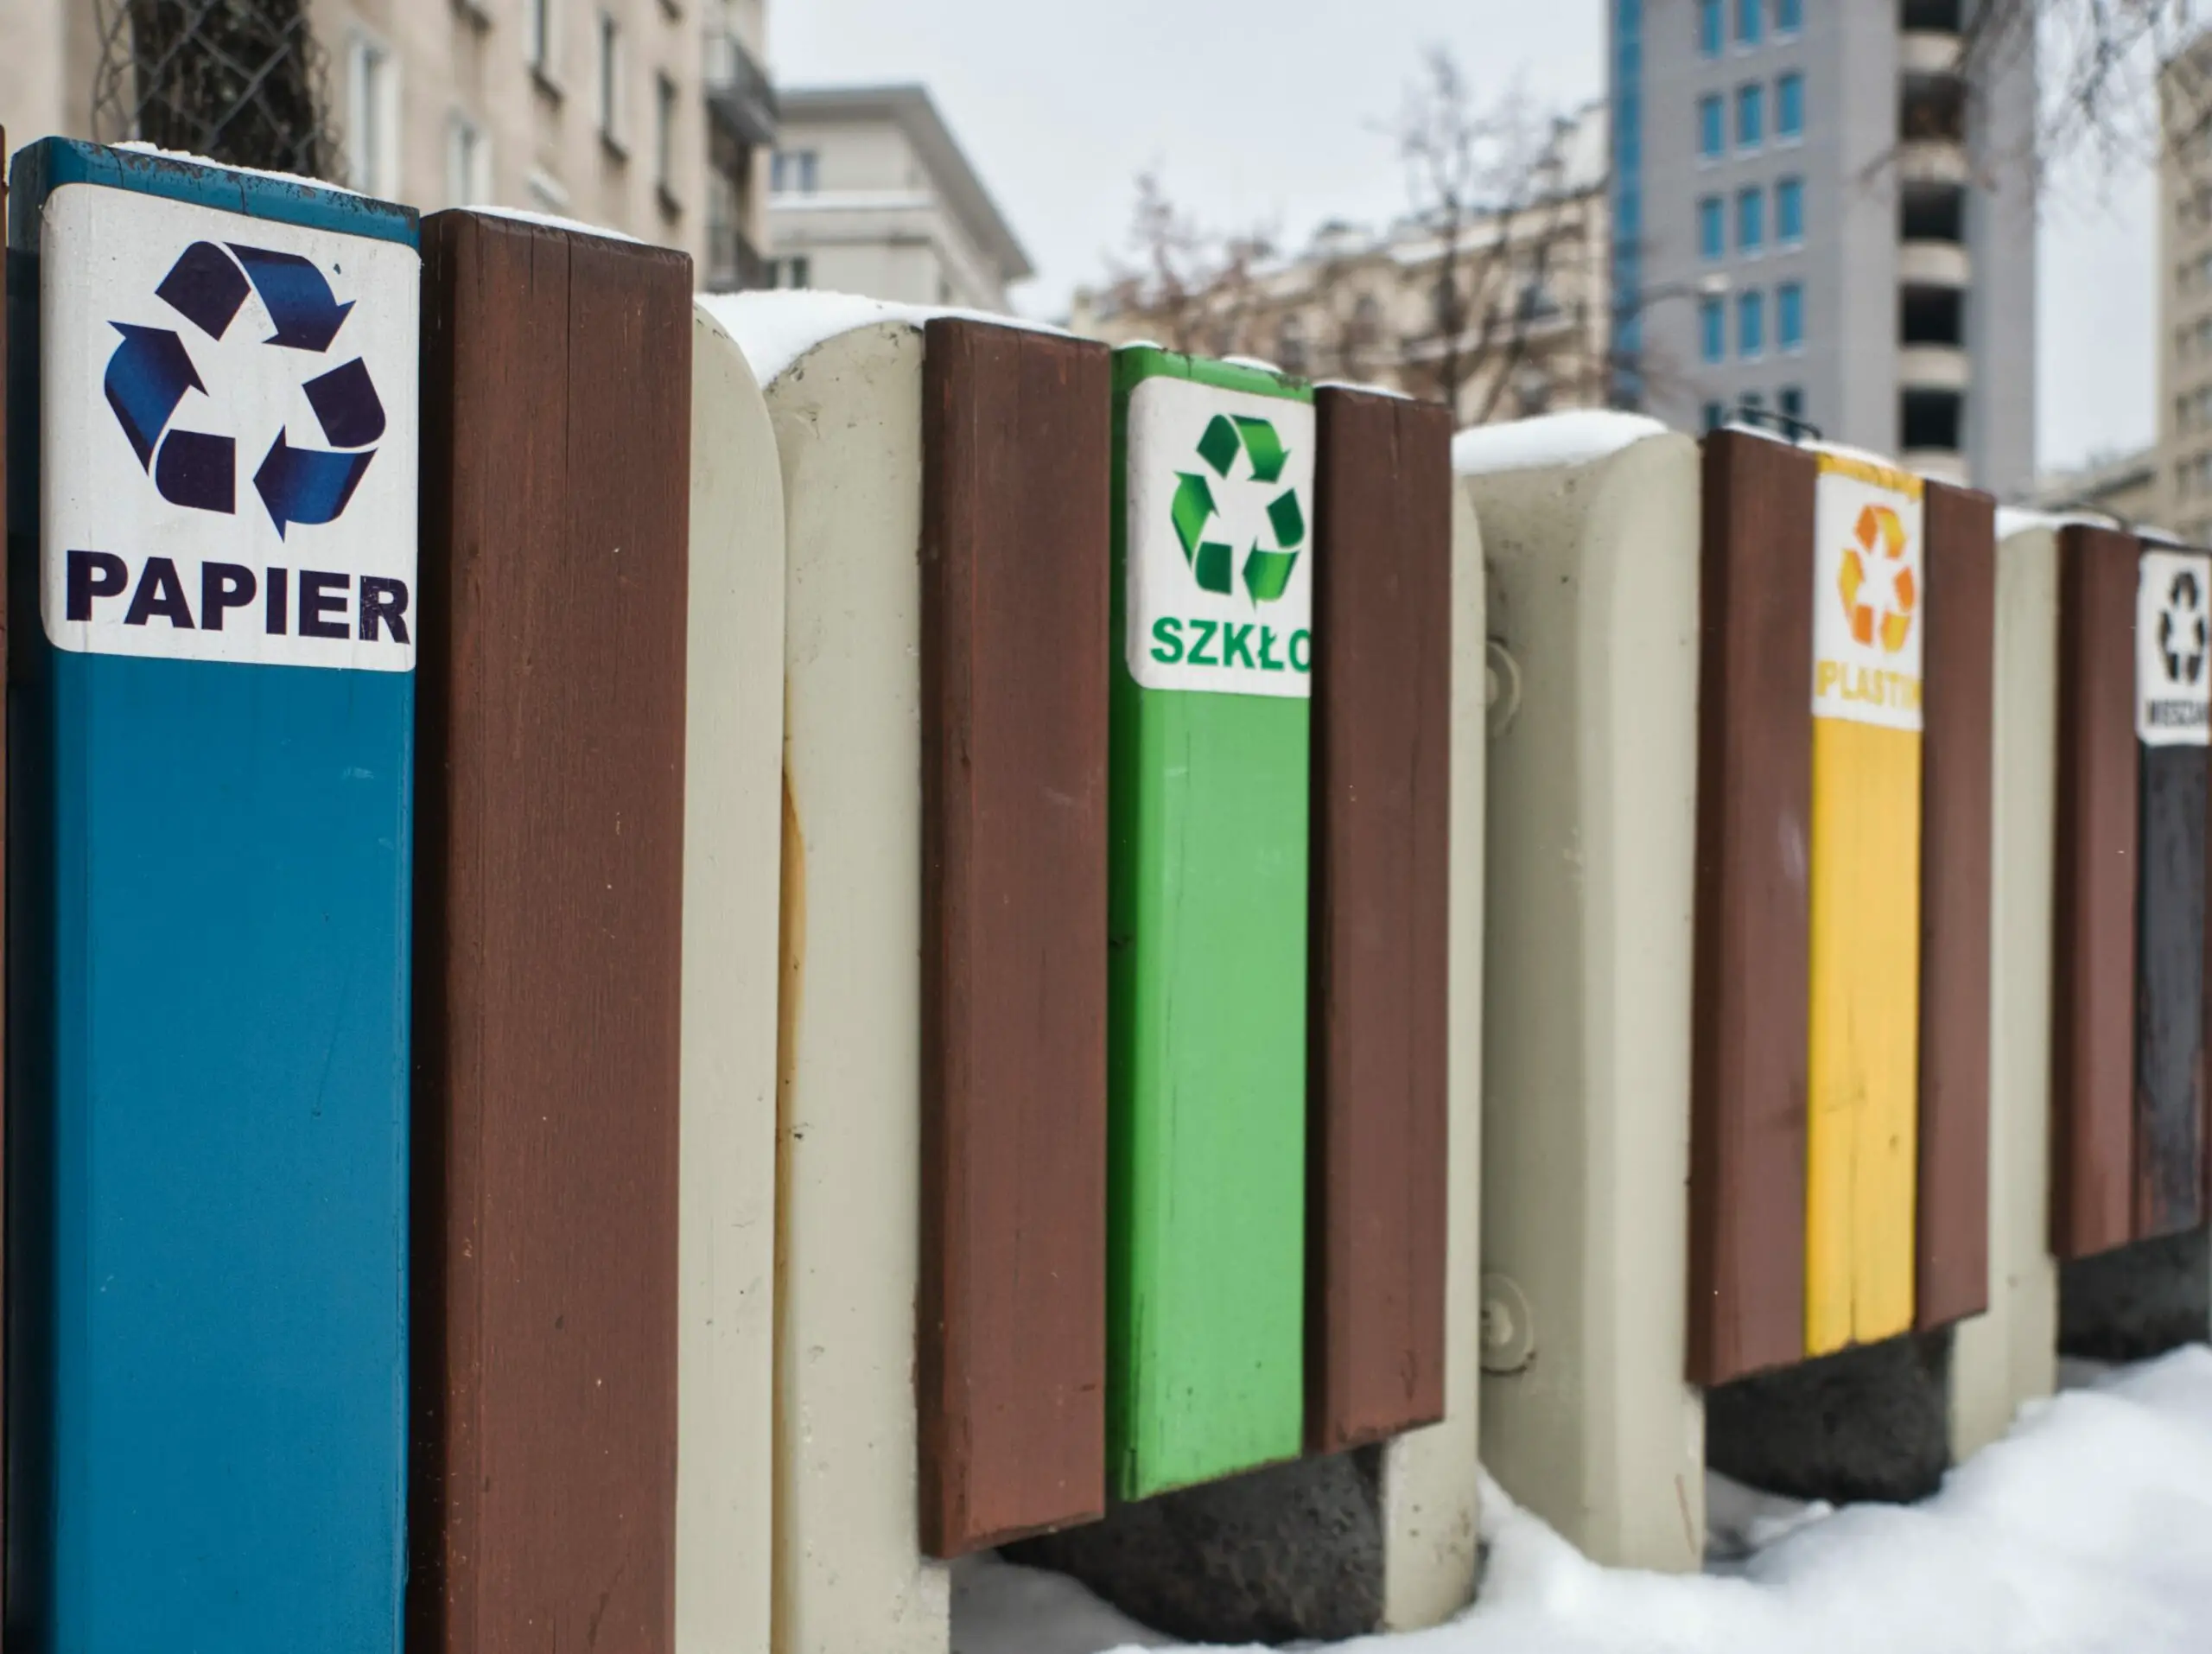 What Are The 3 Main Steps For Recycling To Be Successful?